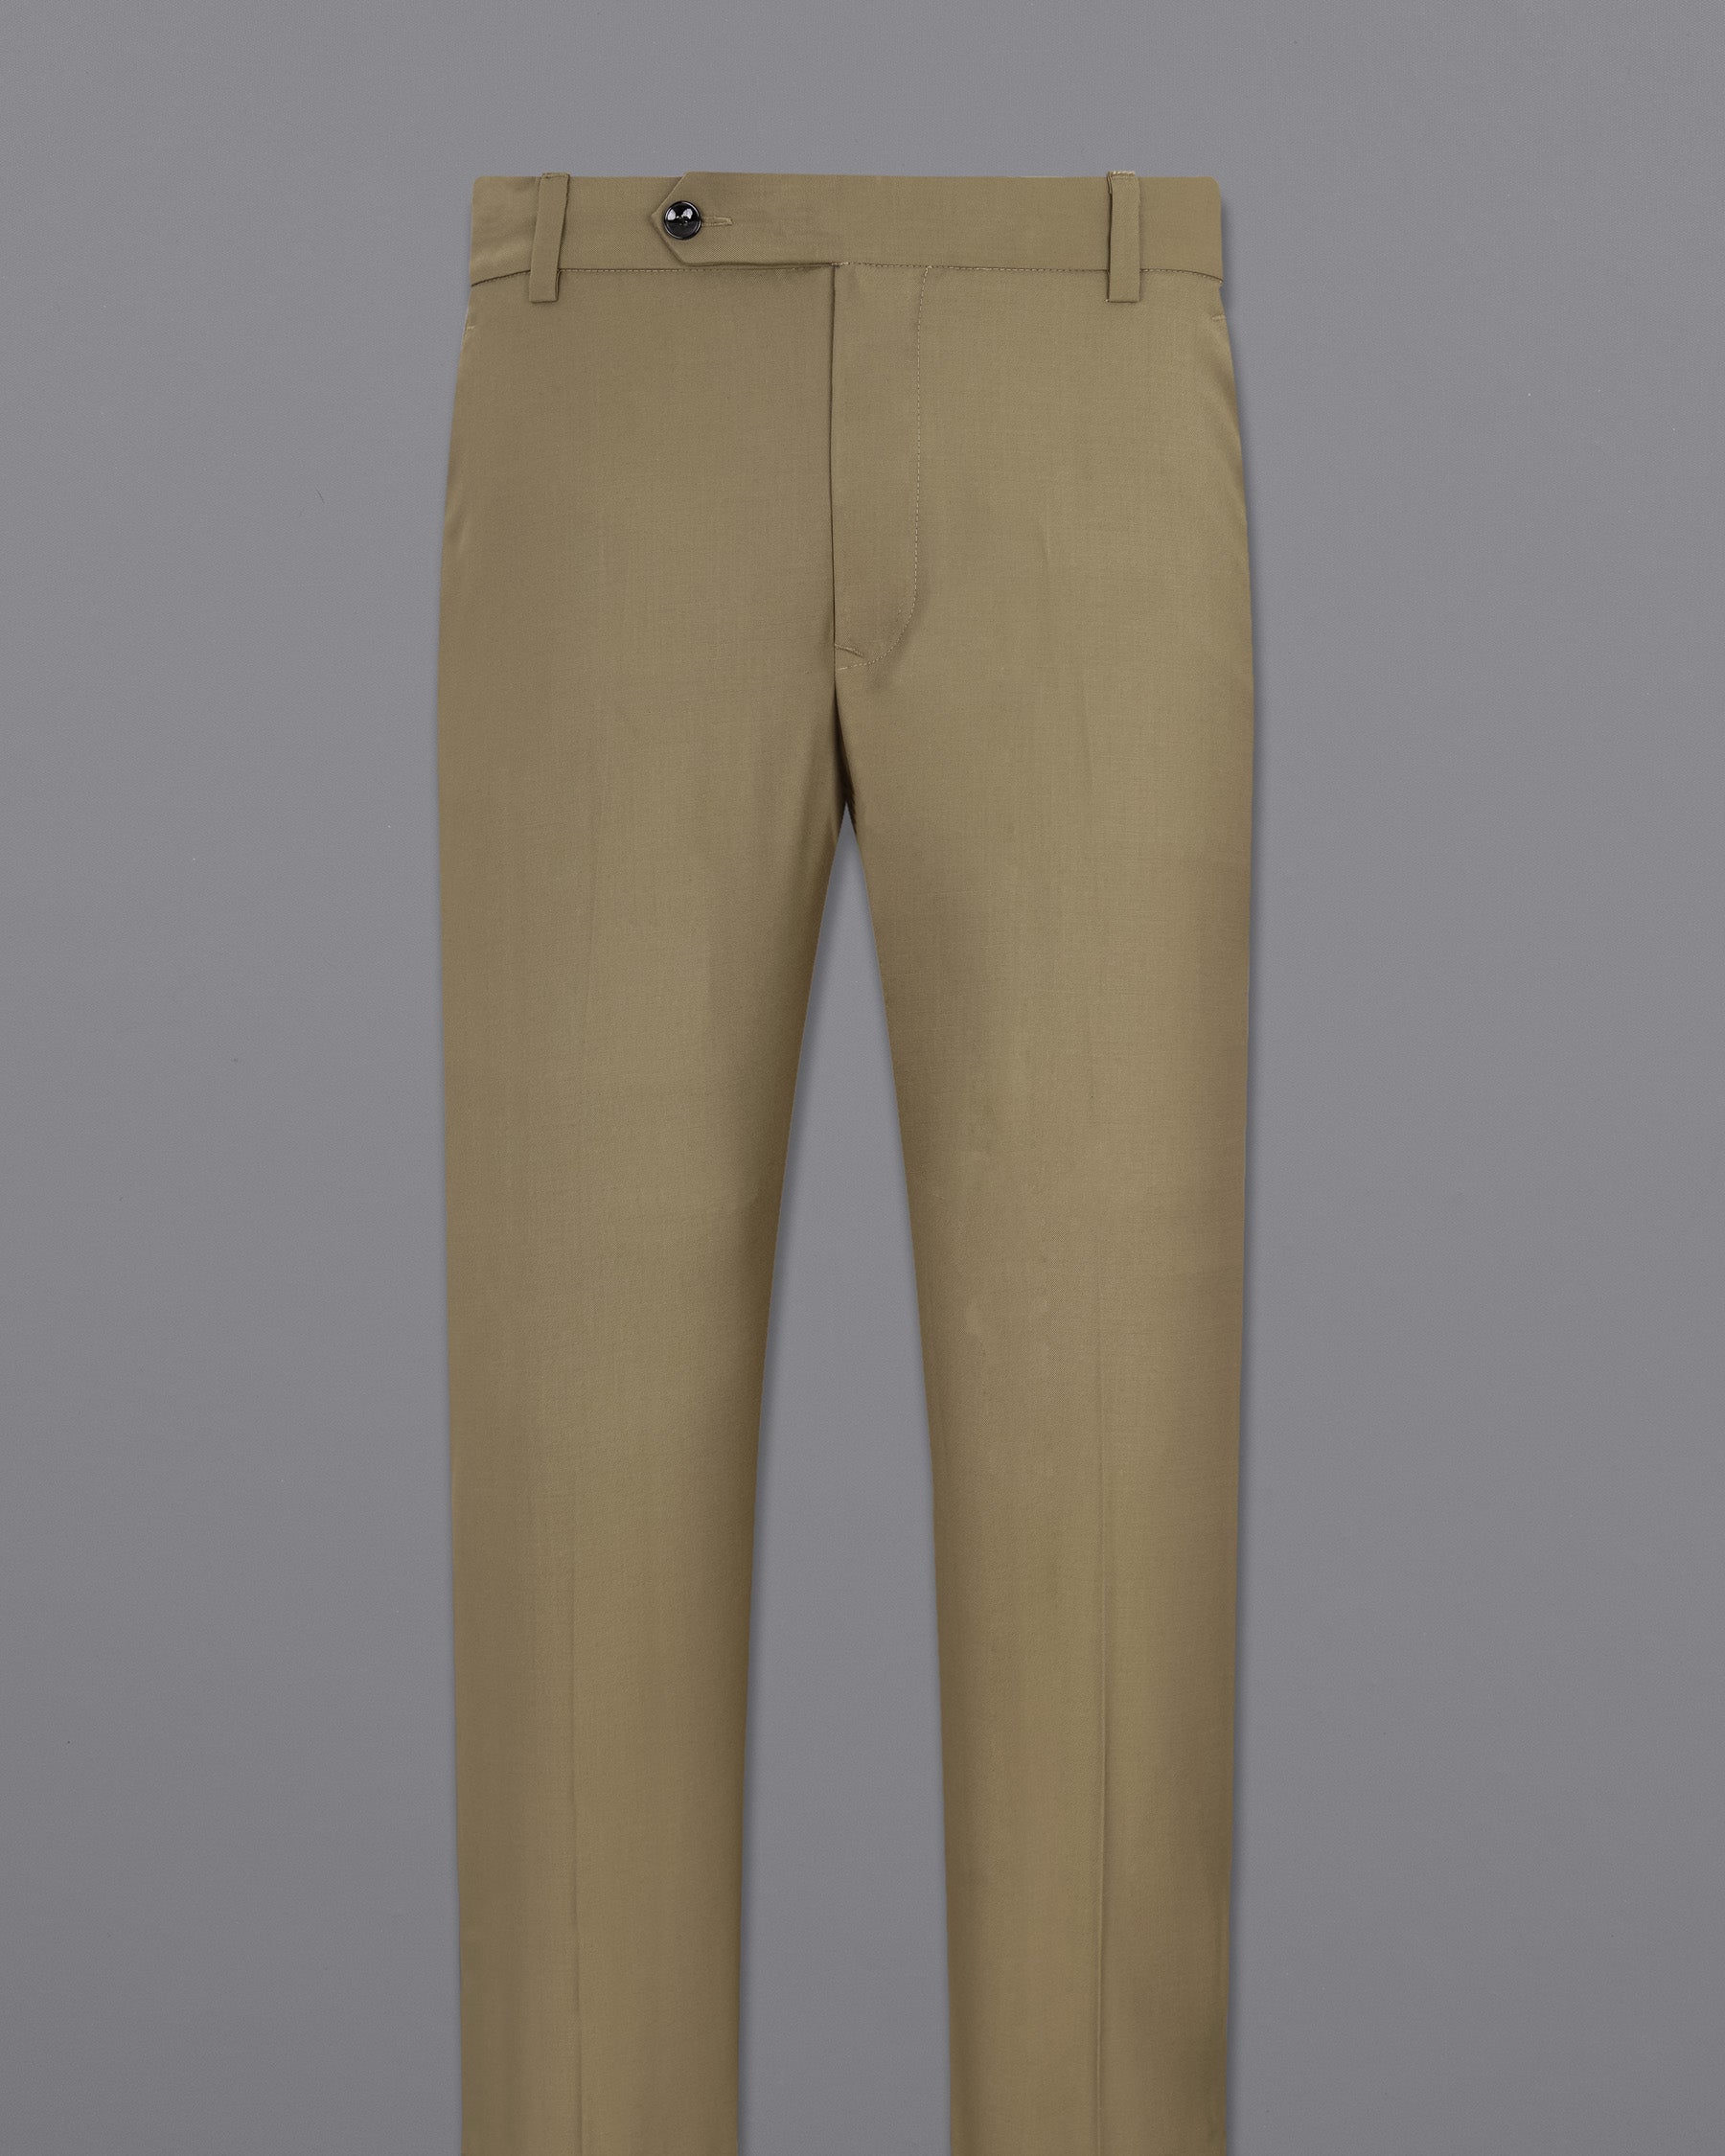 Shadow Brown Textured Pant T1974-28, T1974-30, T1974-32, T1974-34, T1974-36, T1974-38, T1974-40, T1974-42, T1974-44